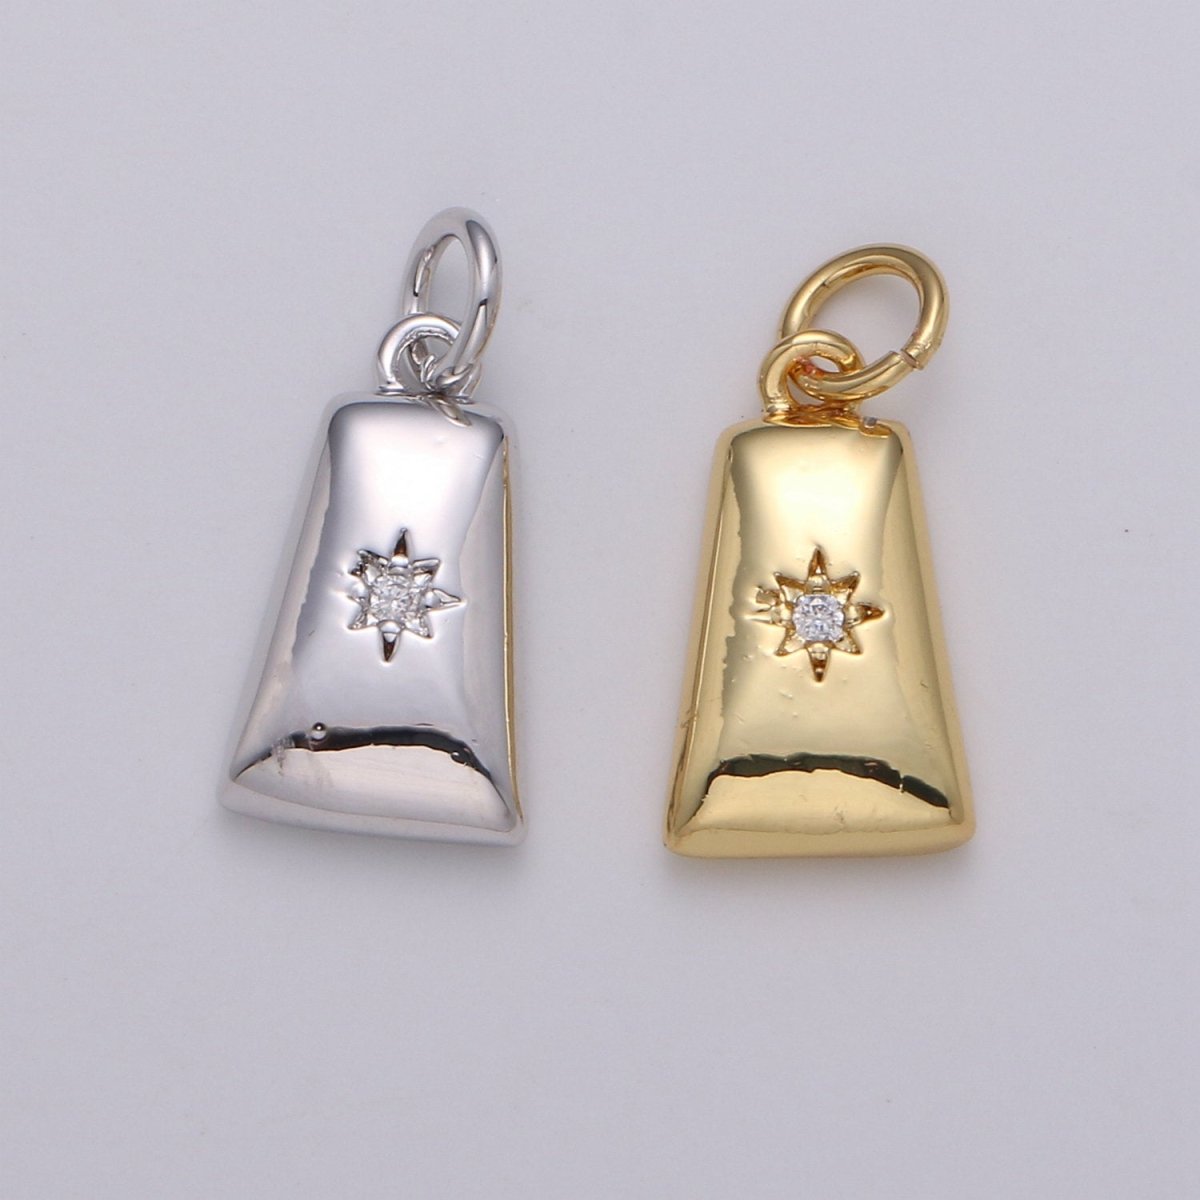 Dainty 14k Gold Filled North Star Charm Cubic Zirconia Geometric Pendant in Gold micro Pave CZ North Star Pendant Jewelry Making D-427 D-428 - DLUXCA